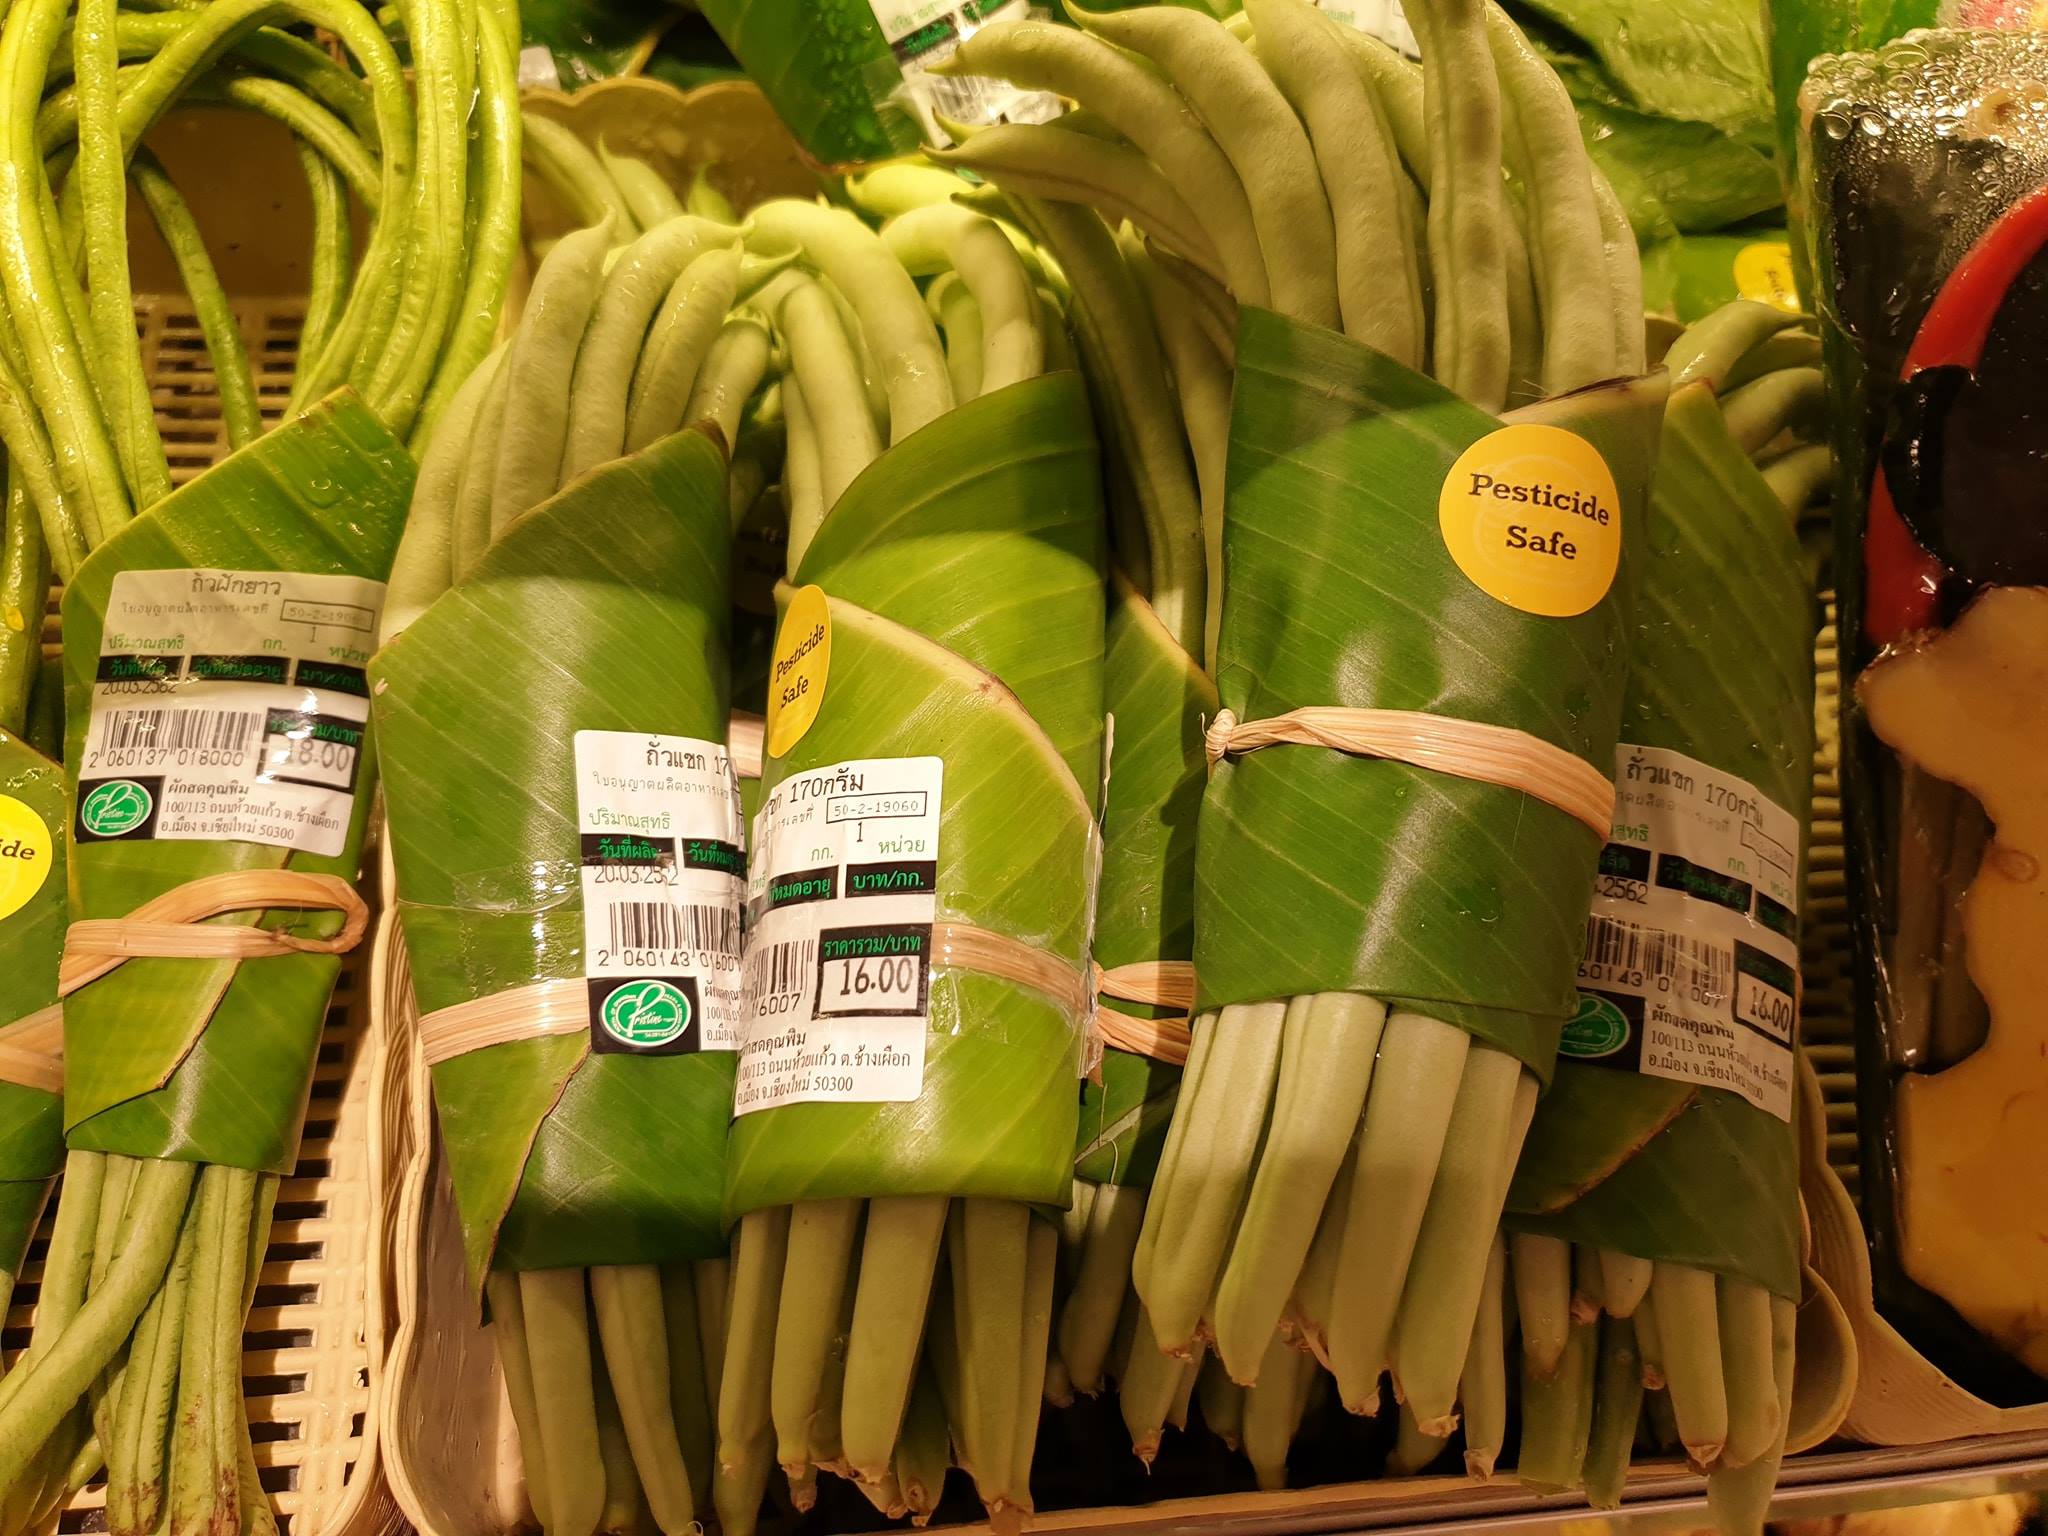 In more temperate locations the use of banana leaves could be significantly more expensive than plastic. However, using local biodegradable products could be a good alternative in locations where bananas don't grow.